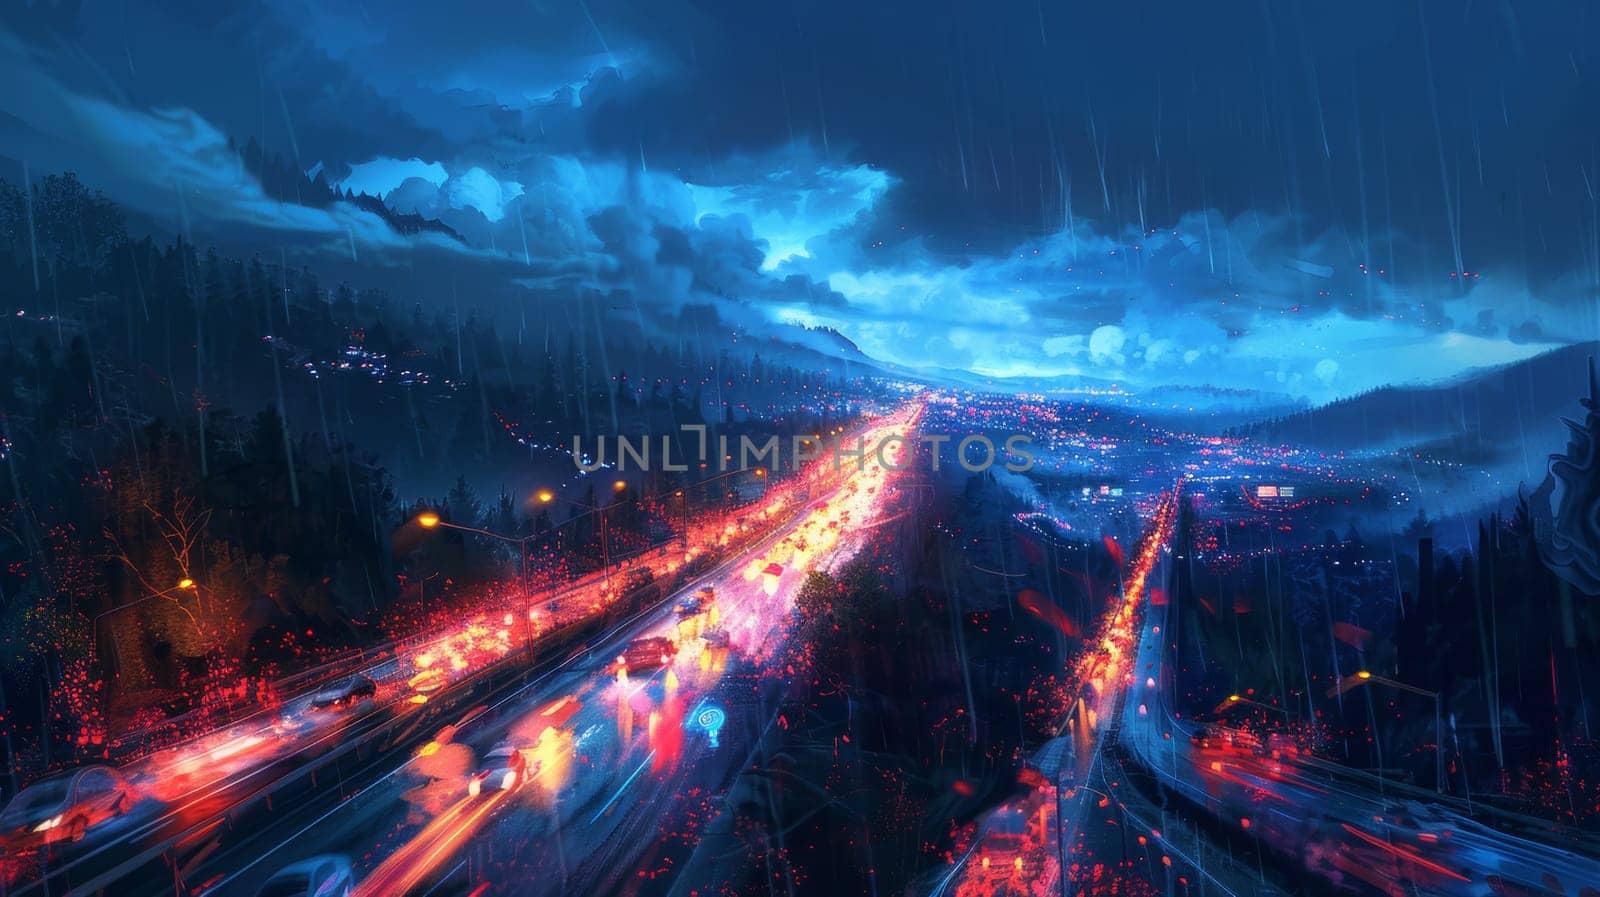 A painting of a city street with cars and lights at night, AI by starush